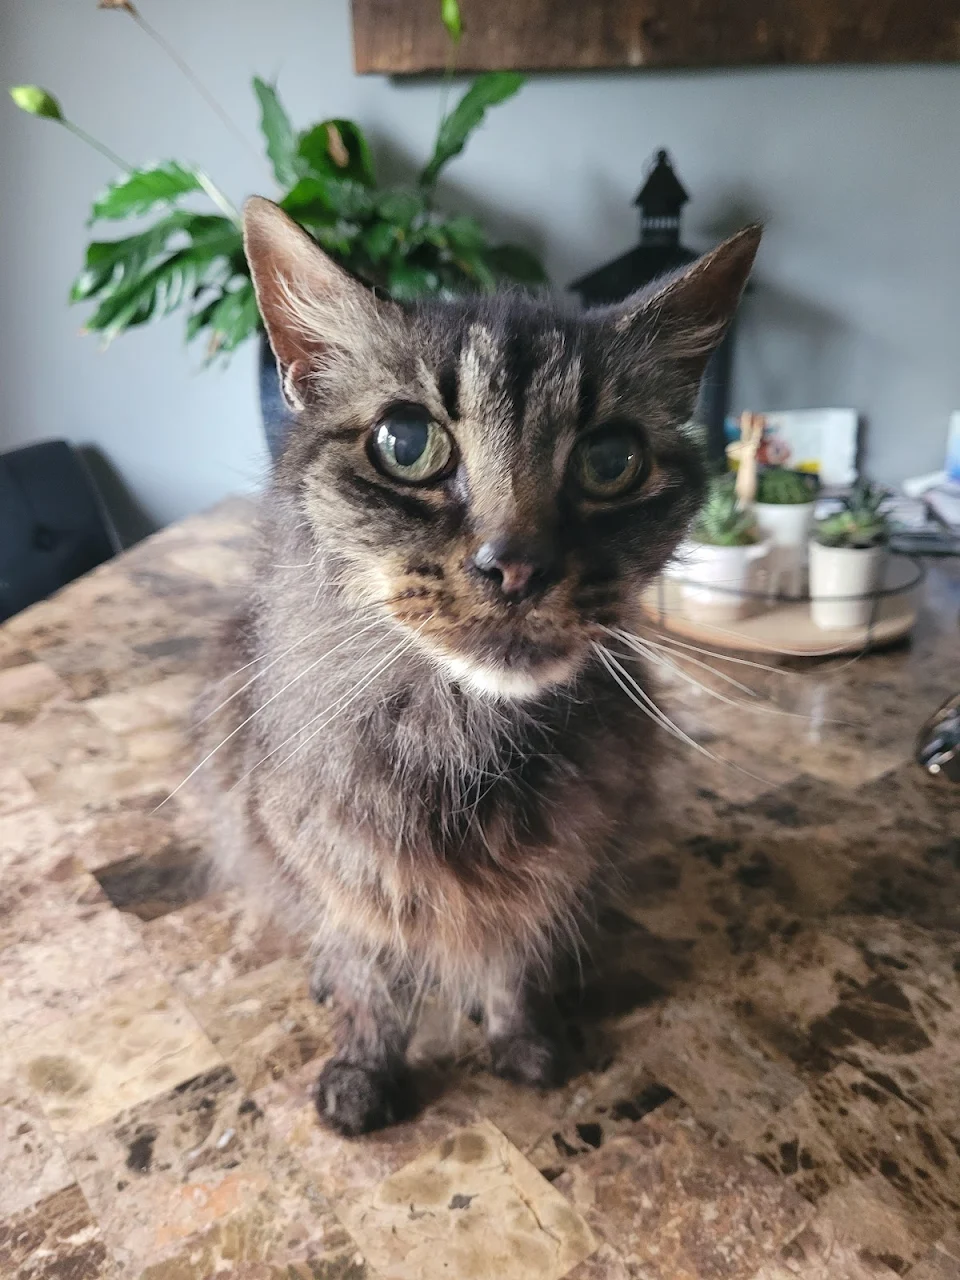 Miss Scruffy just celebrated her 20th go around the sun! Happy Birthday, Old Gal!